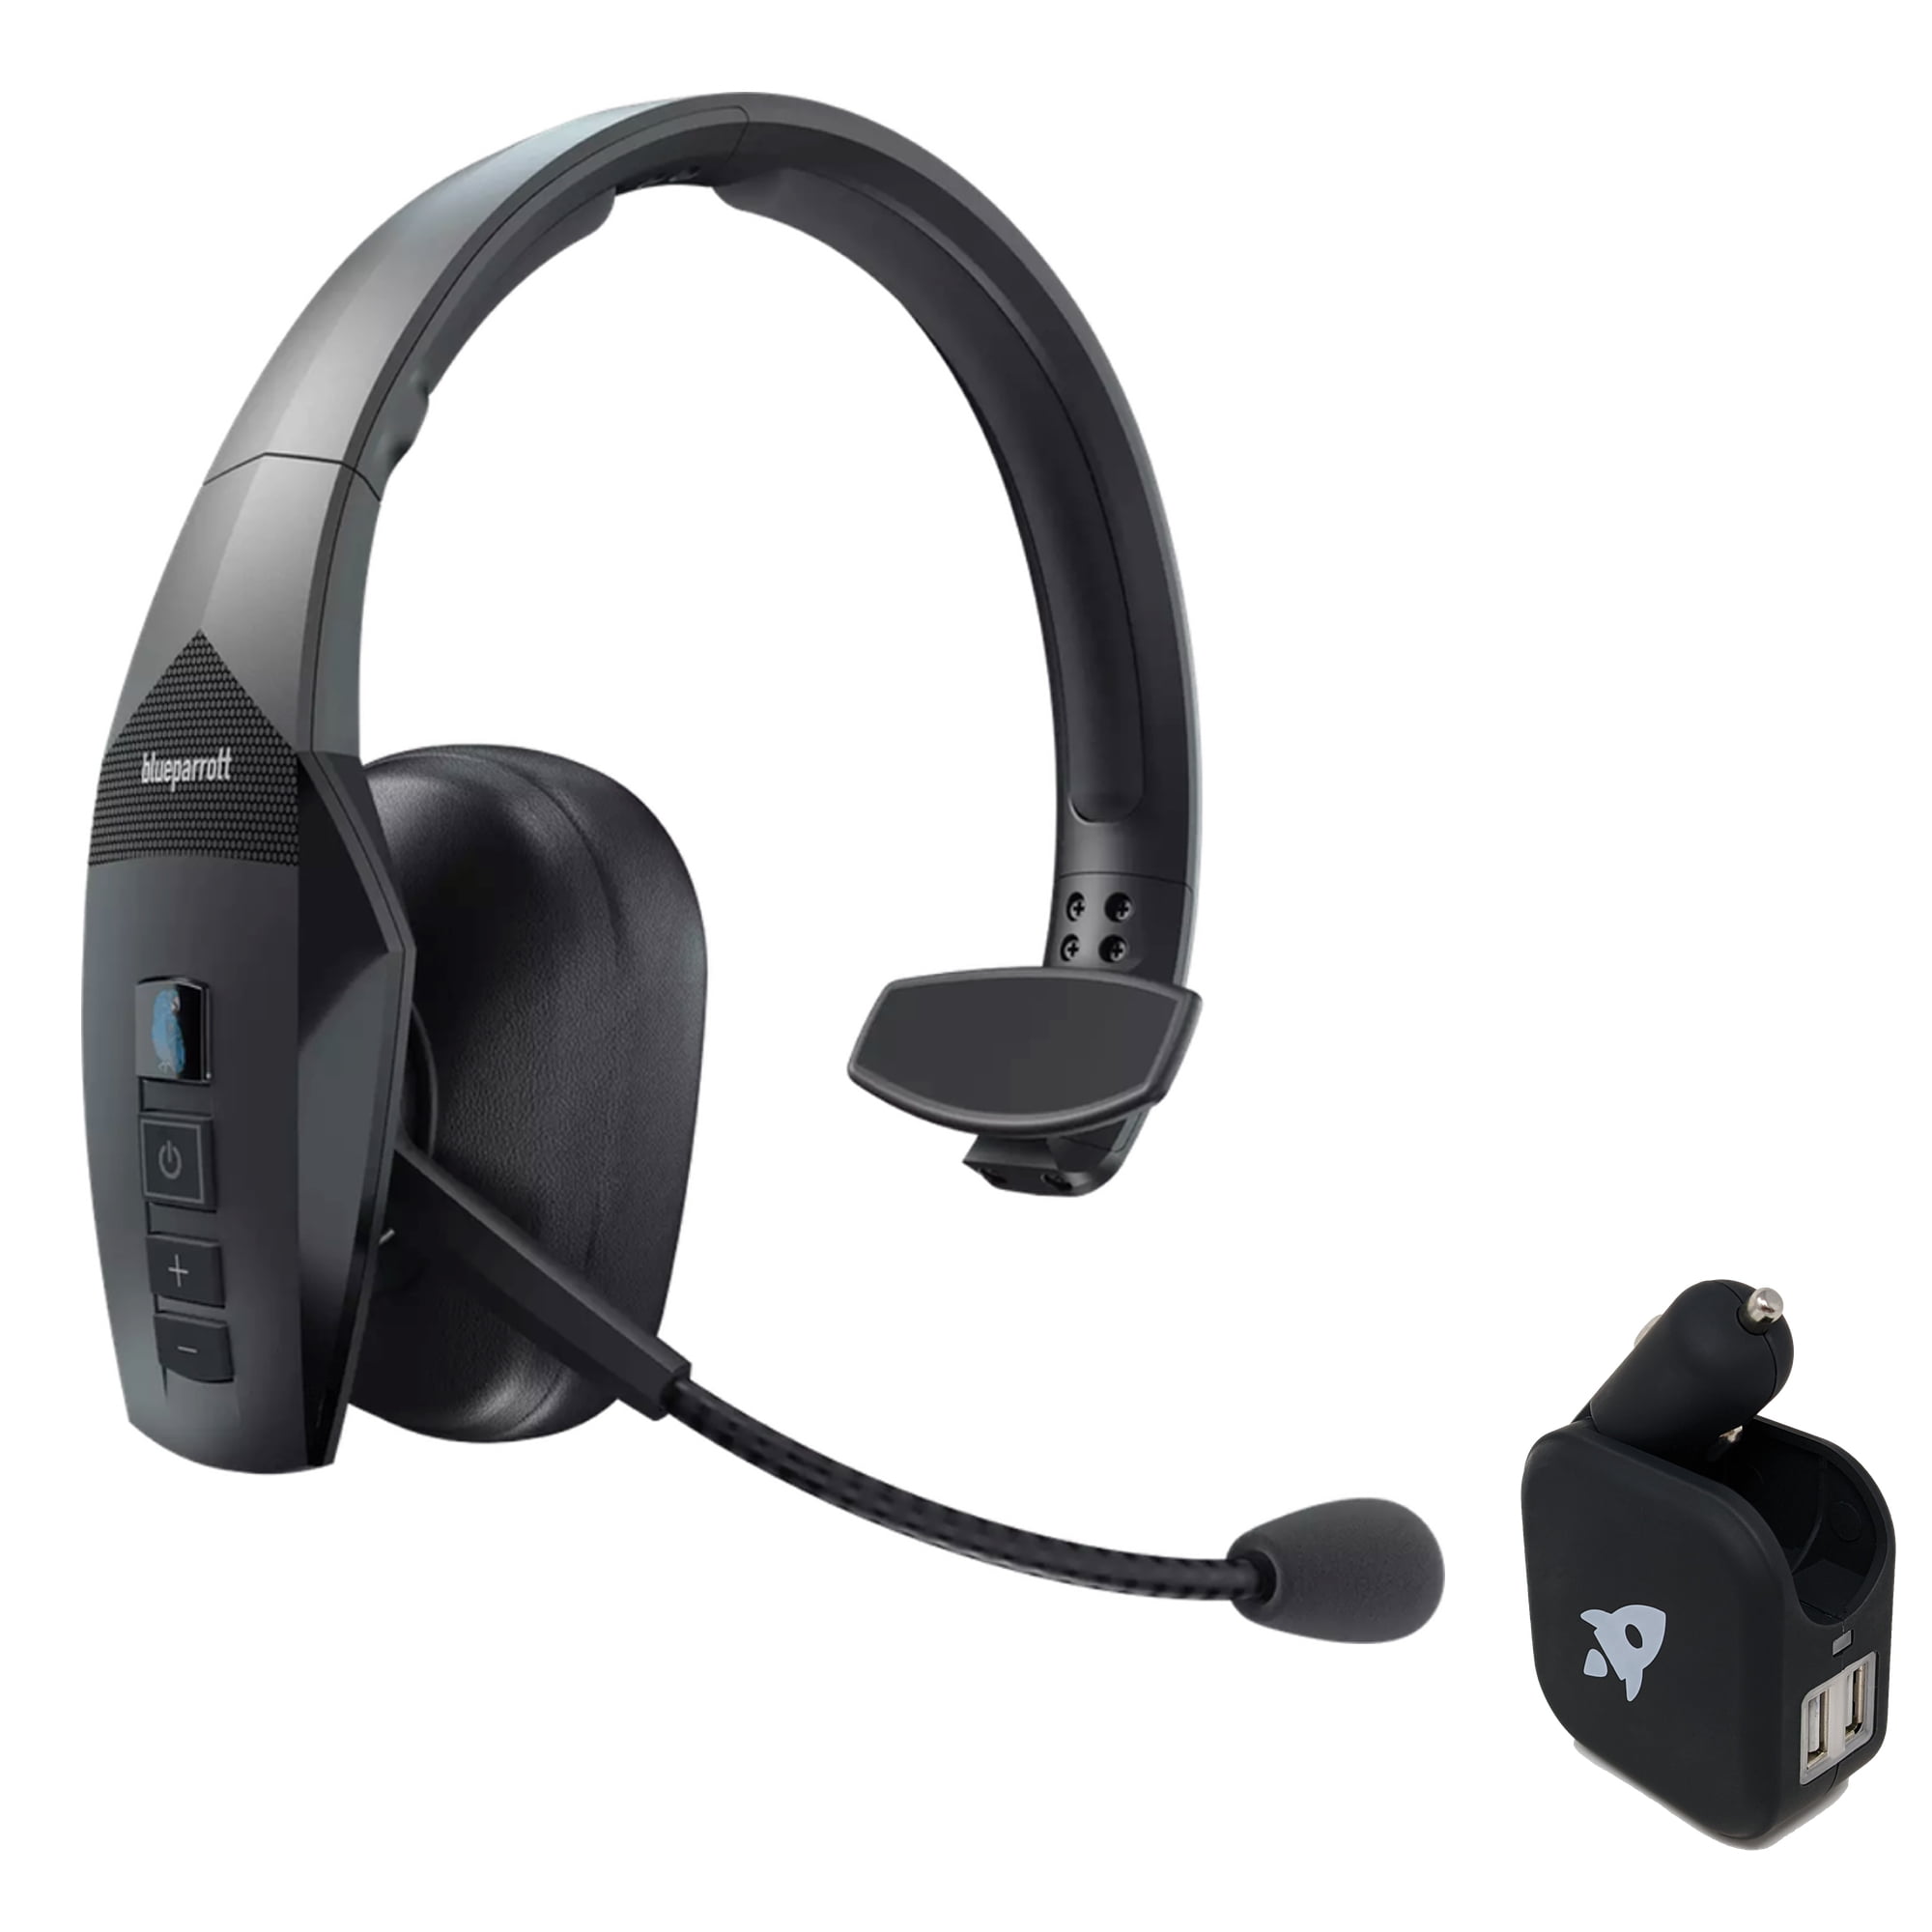 BlueParrott B550-XT Bluetooth Headset Bundle 204165-C Includes USB Port  Car/Wall Charger Streaming Music, and NFC Ready 100% Voice-Controlled  Headset Water and Dust Resistant IP54 Rated